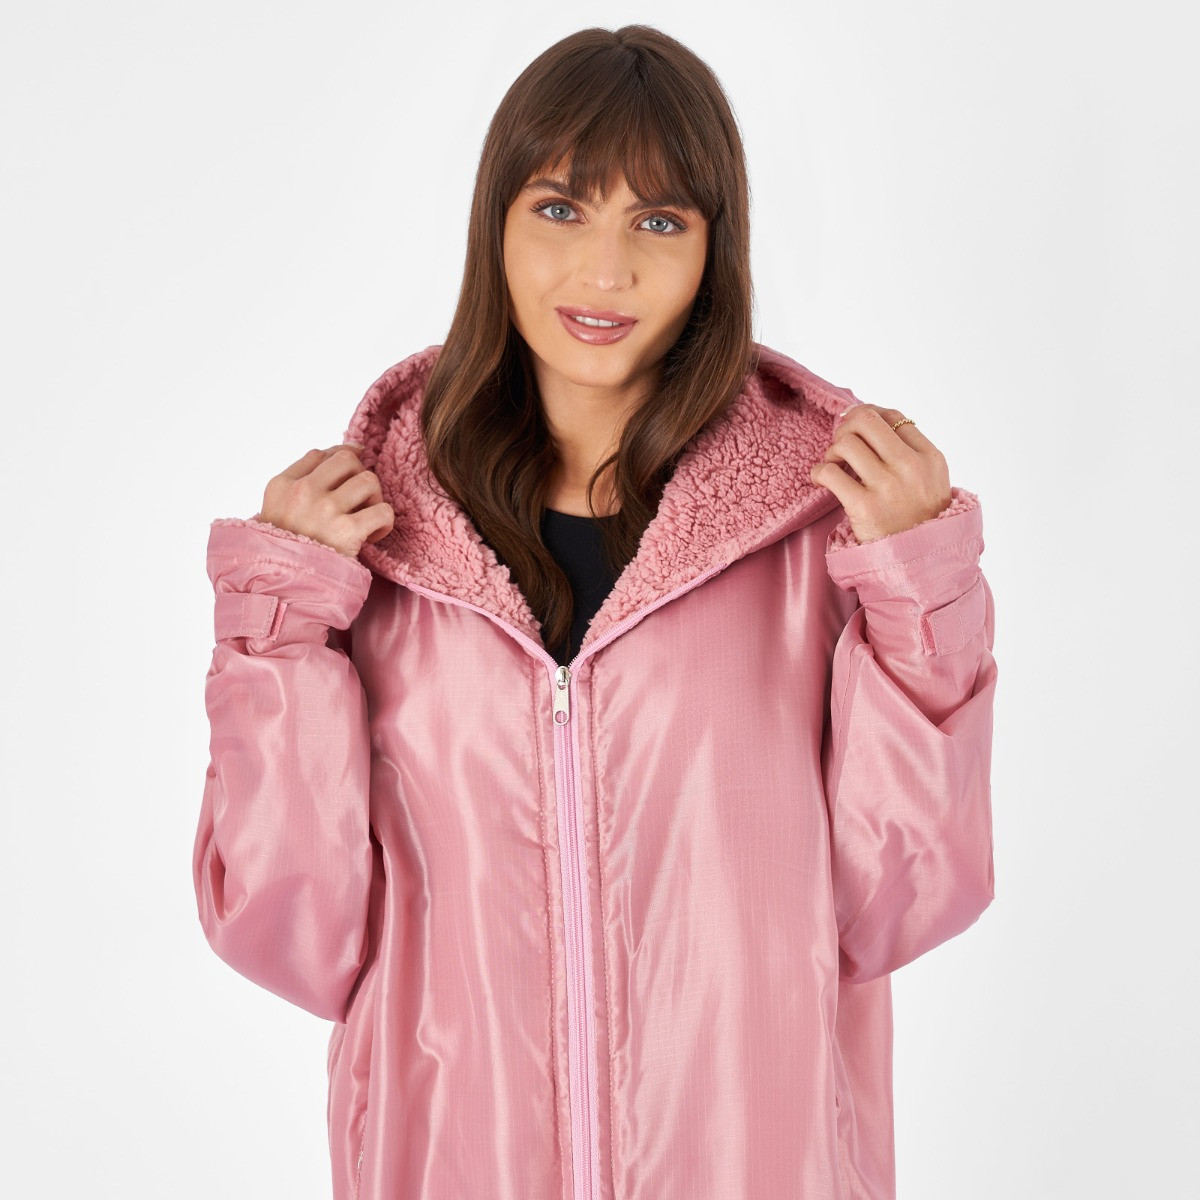 OHS Water Resistant Full Zip Changing Robe - Blush>